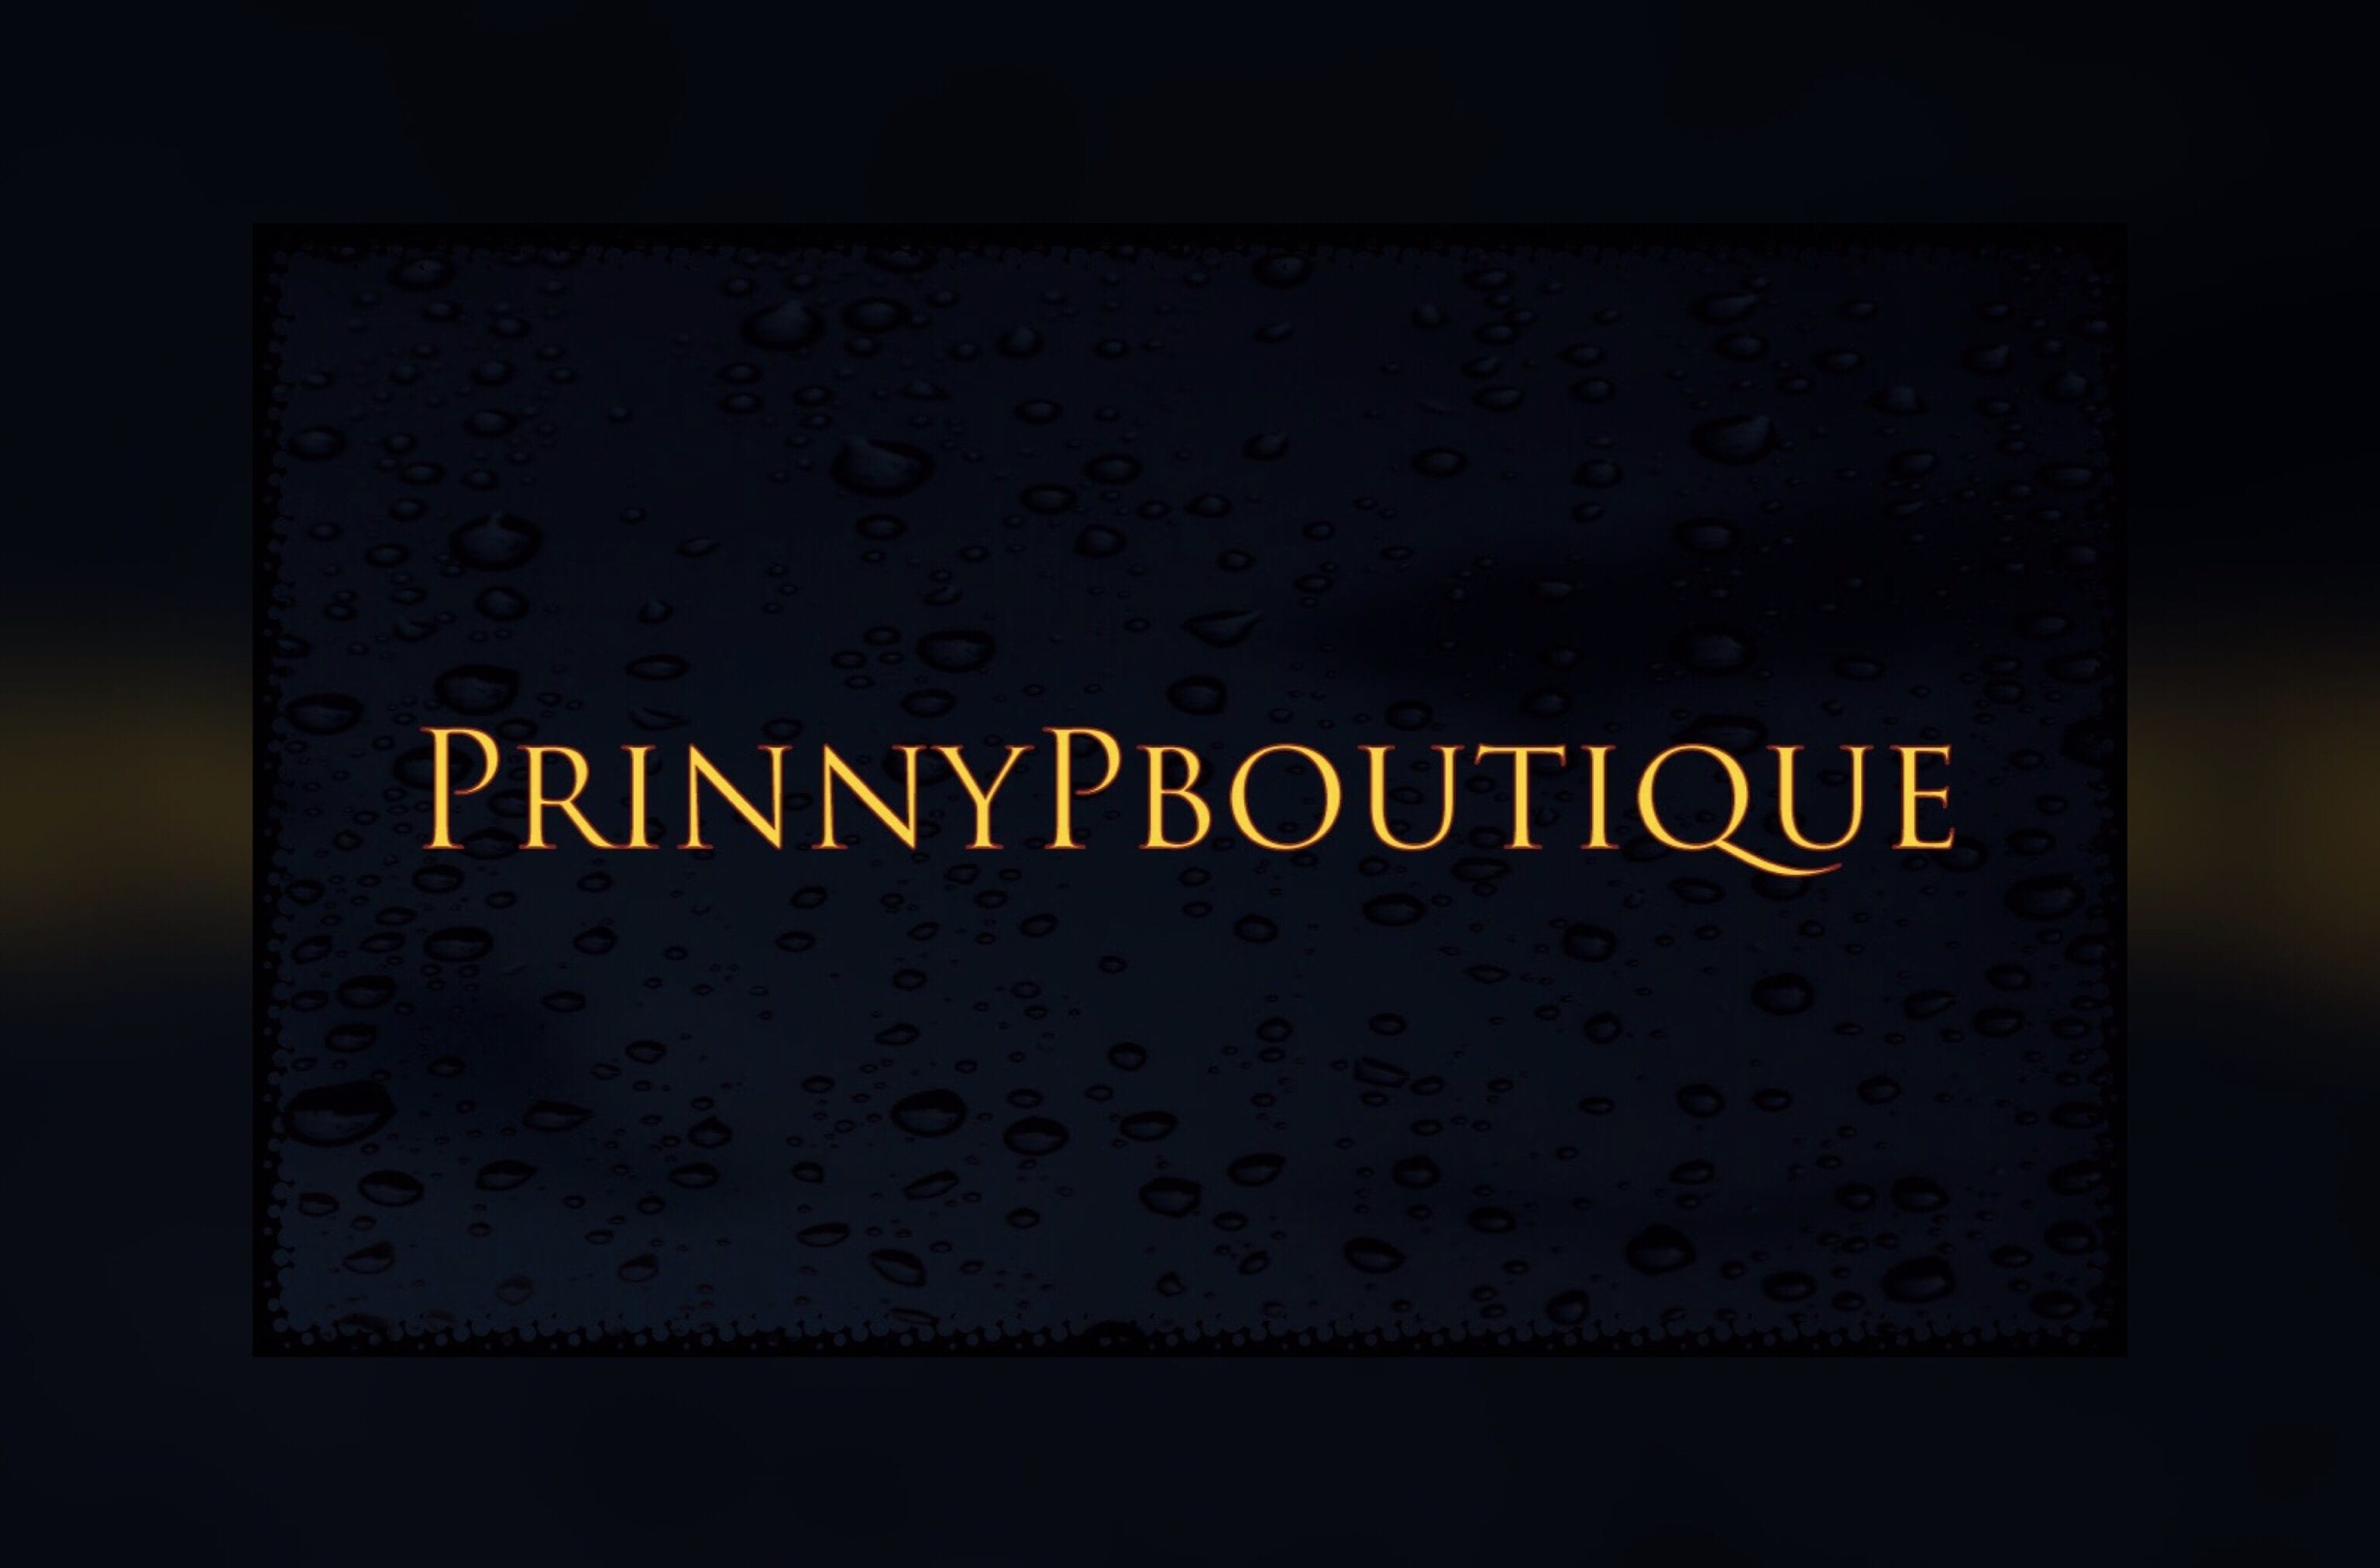 PrinnypBoutique